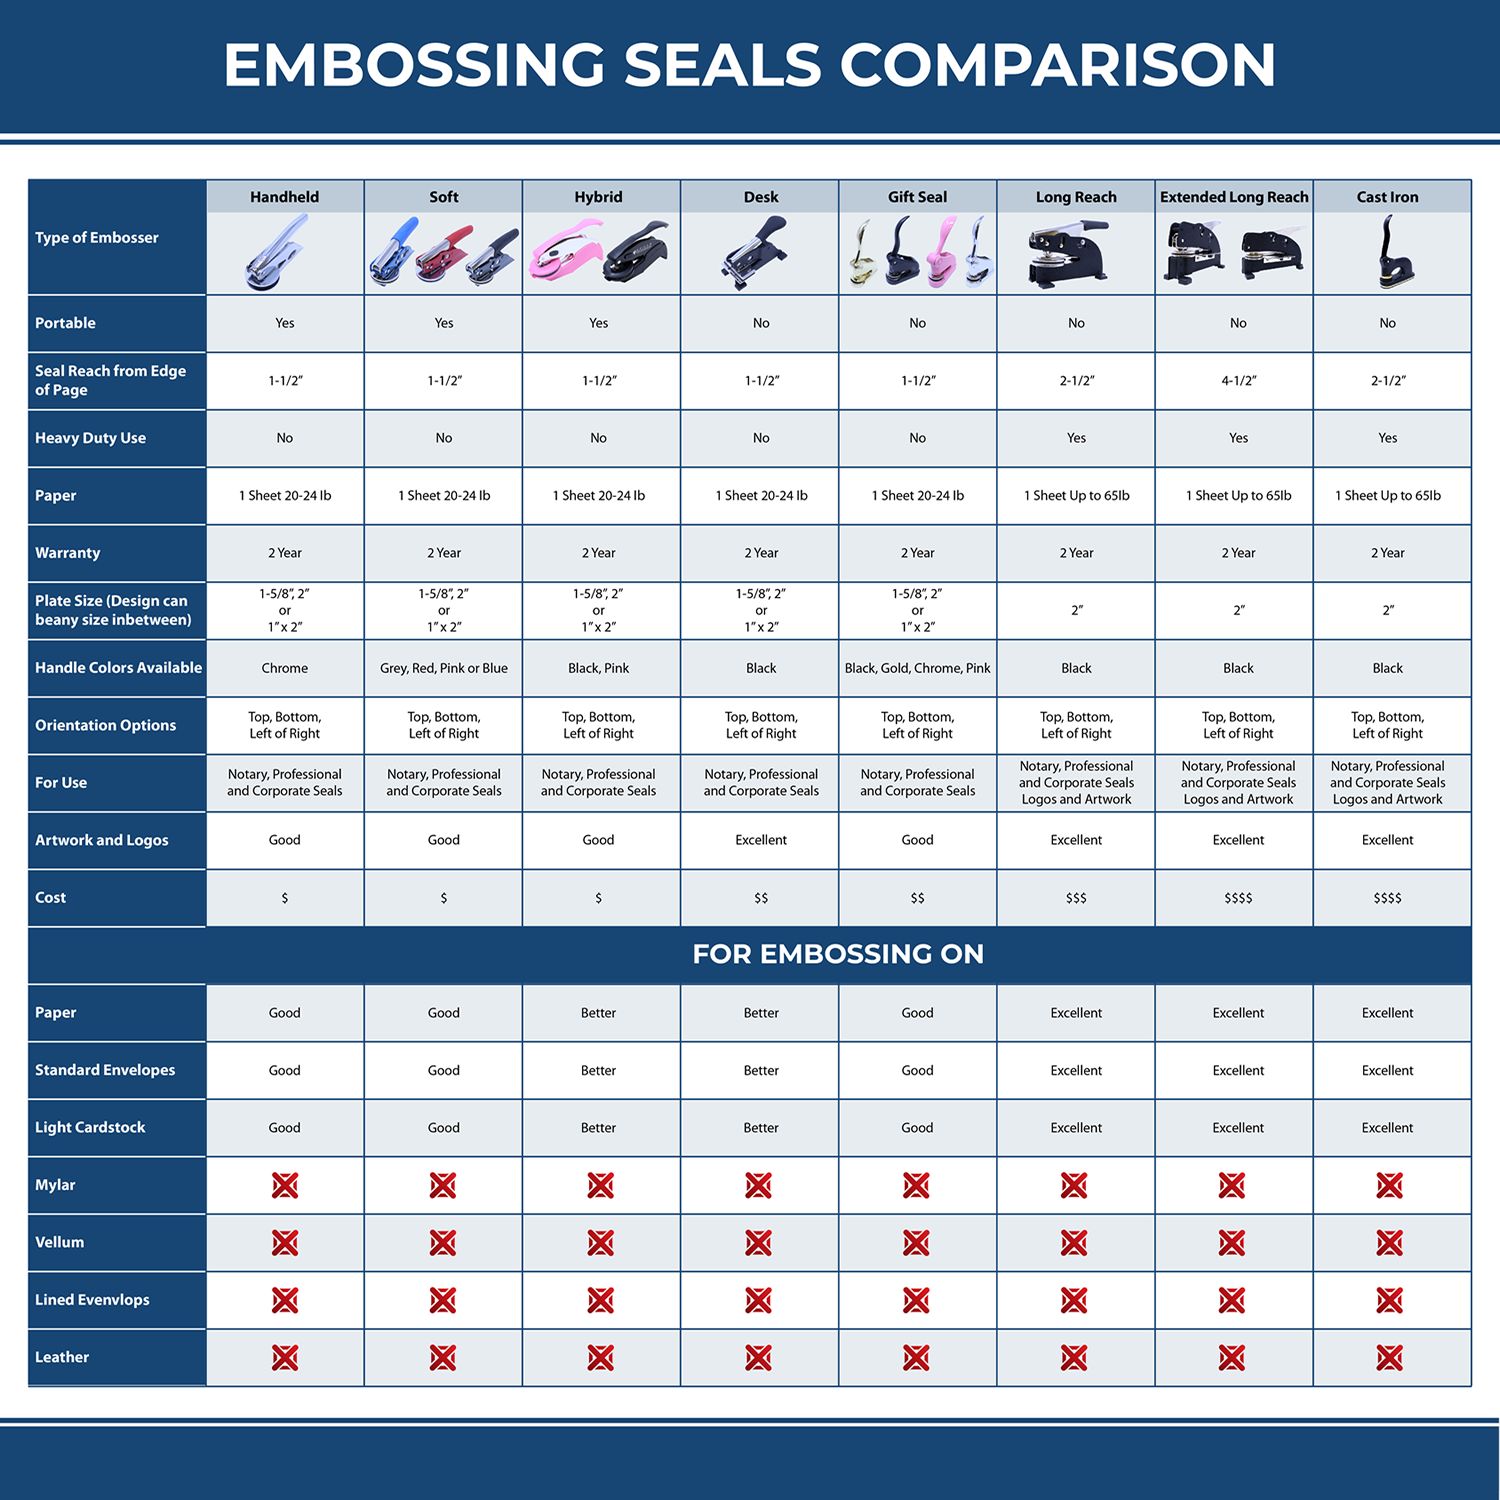 A comparison chart for the different types of mount models available for the Handheld Oklahoma Land Surveyor Seal.